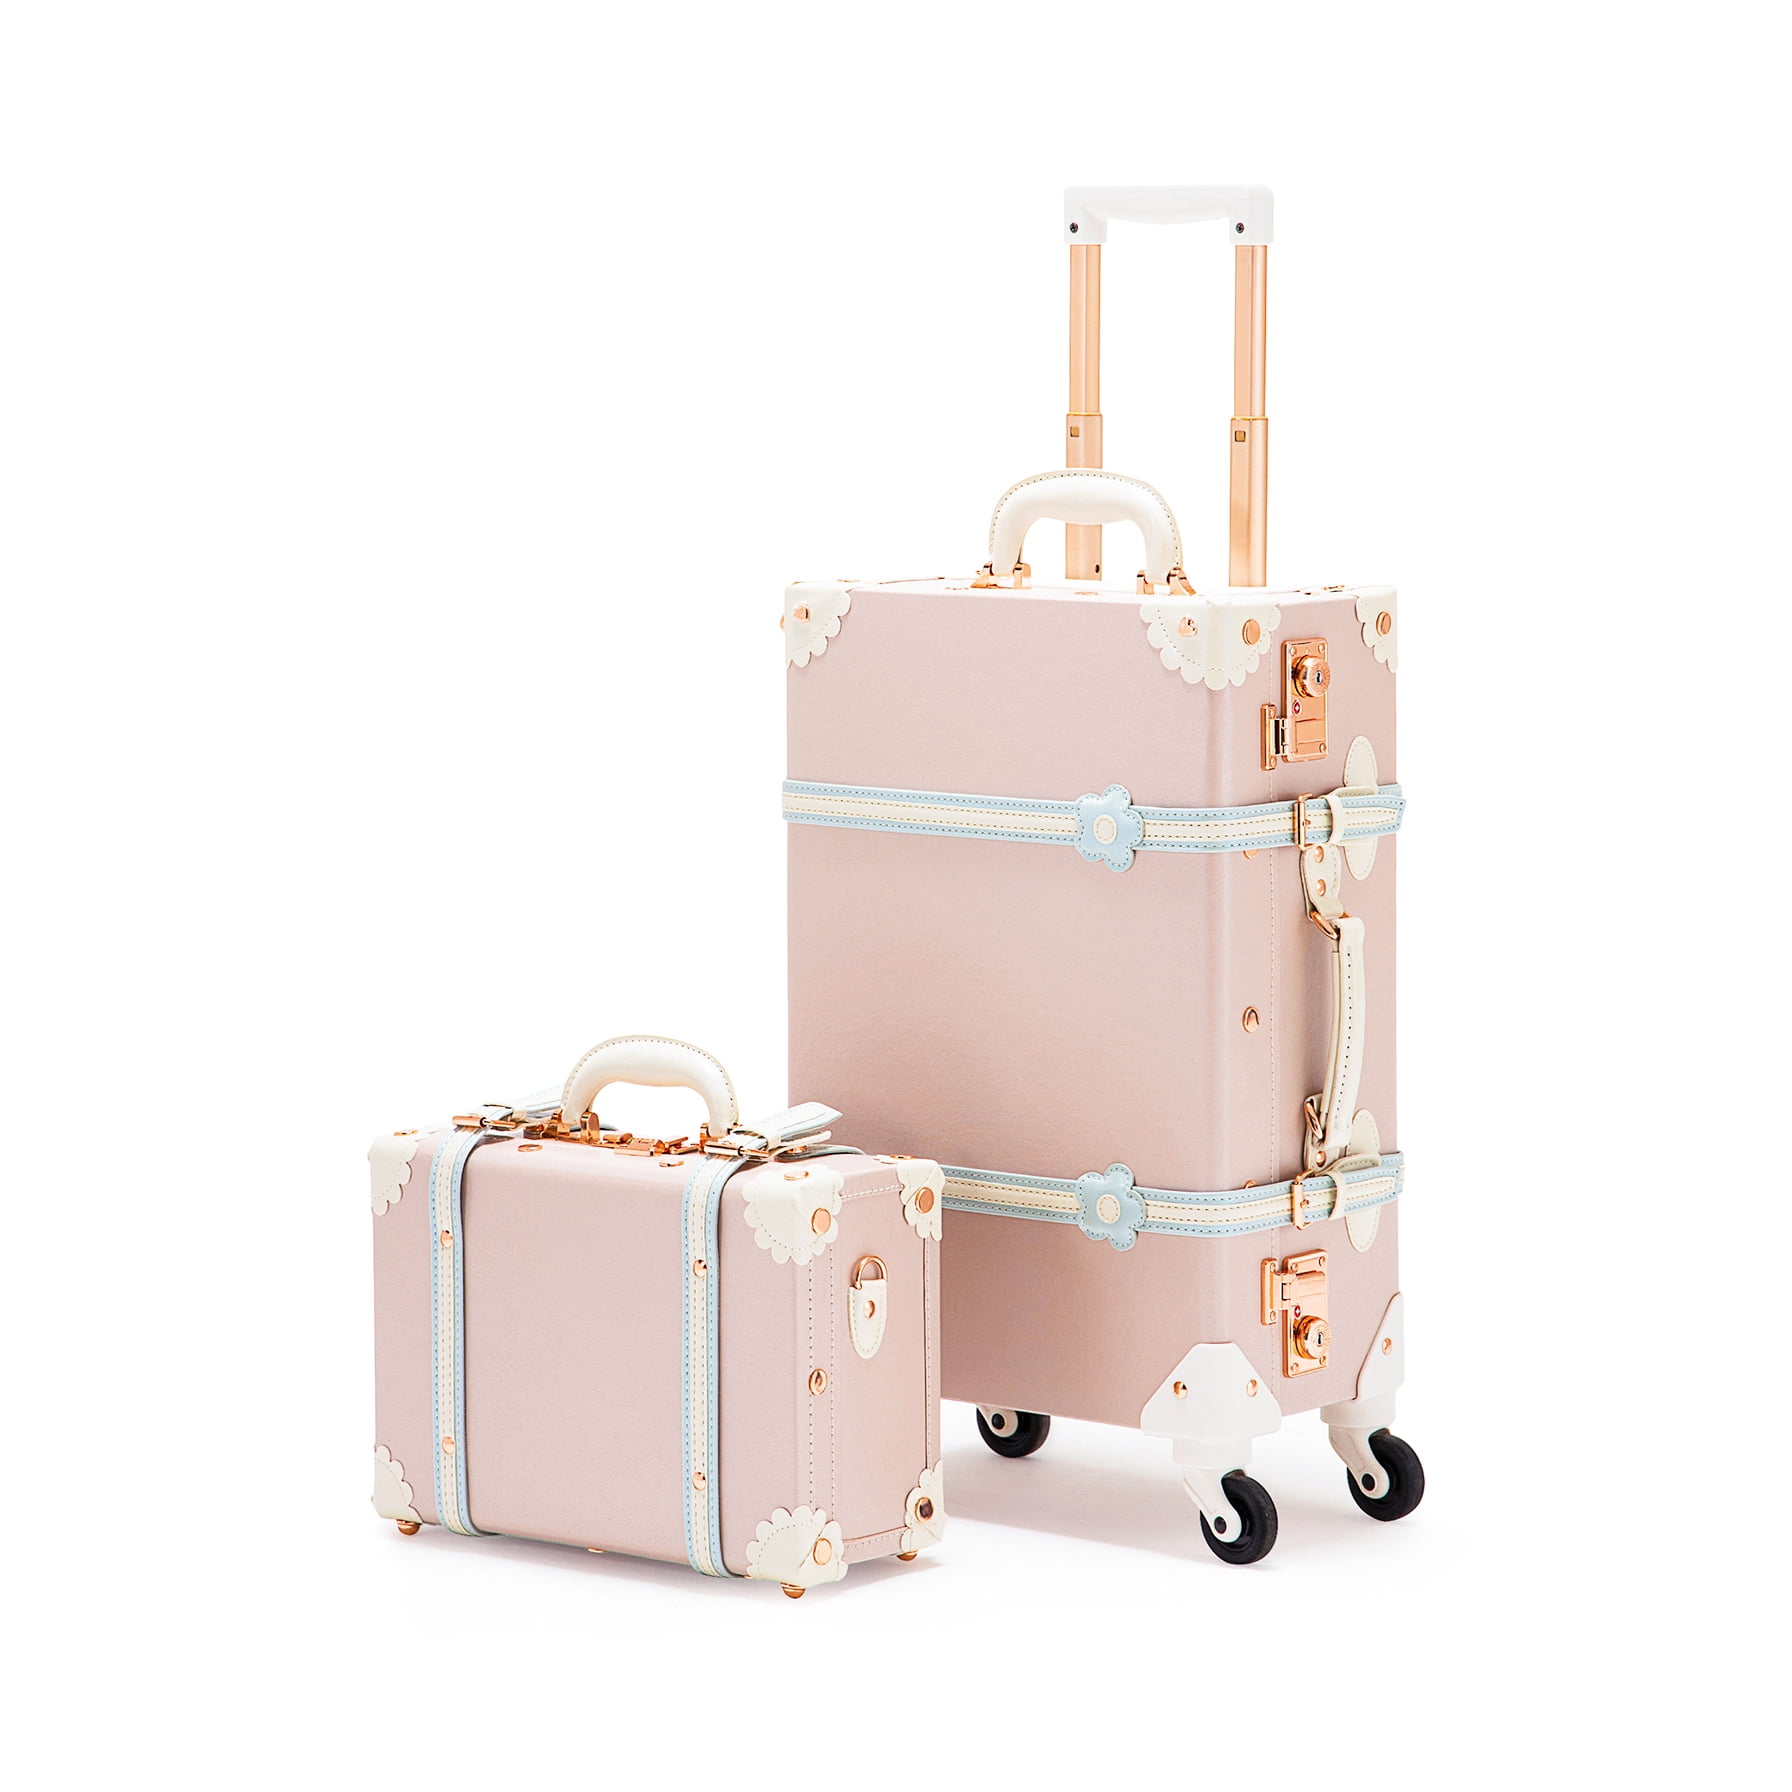 COTRUNKAGE Vintage Luggage Sets for Women, 20 Small Pink Carryon Luggage 2 Piece with Spinner Wheels, 13 Travel Cosmetic Train Case, Cherry Pink